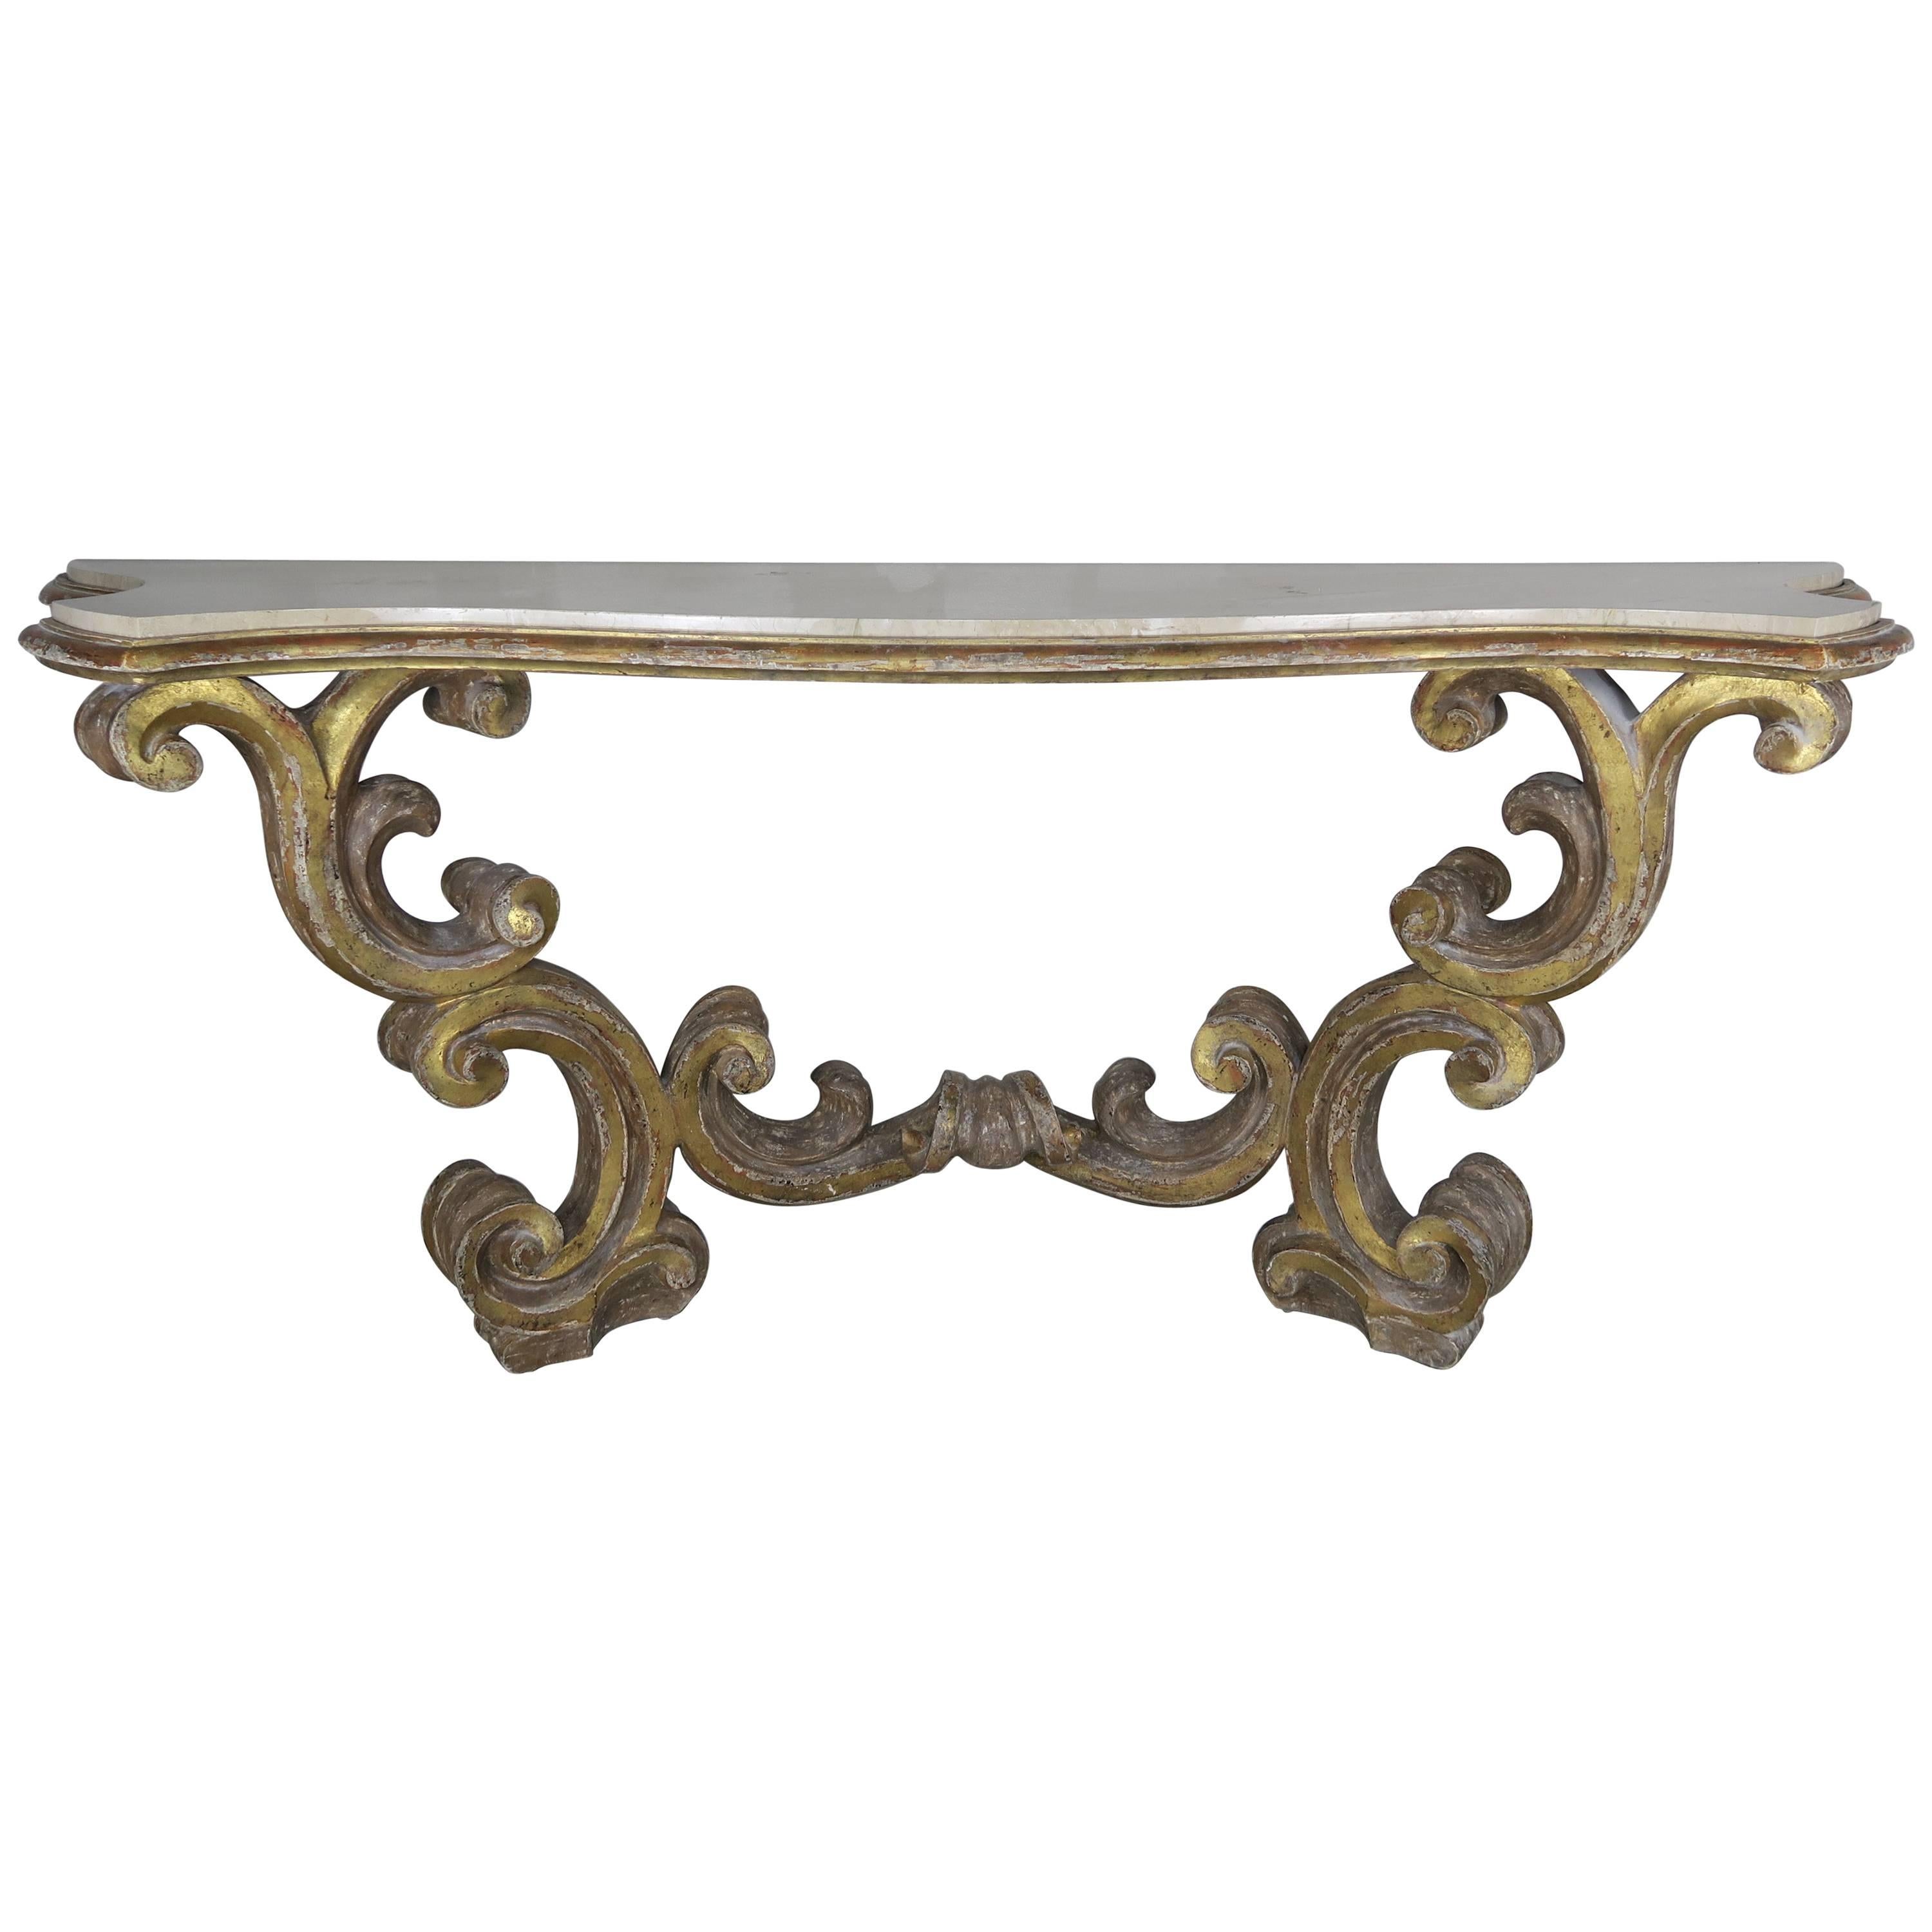 Italian Scrolled Giltwood Marble-Top Carved Console